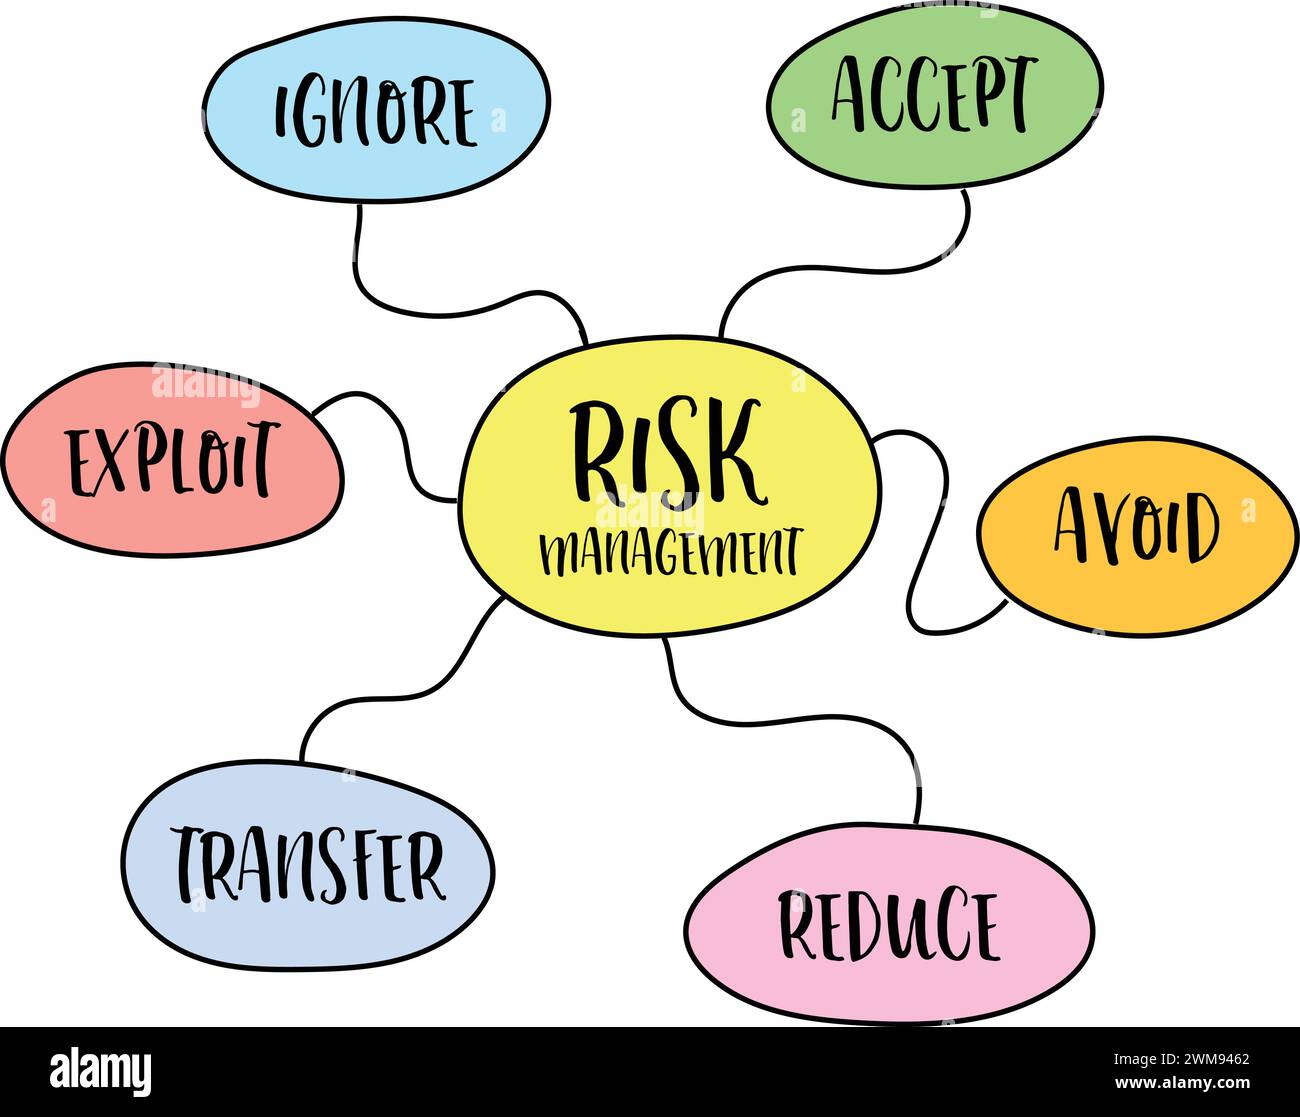 risk management flow chart or mind map, ignore, accept, avoid, reduce, transfer and exploit strategies Stock Vector